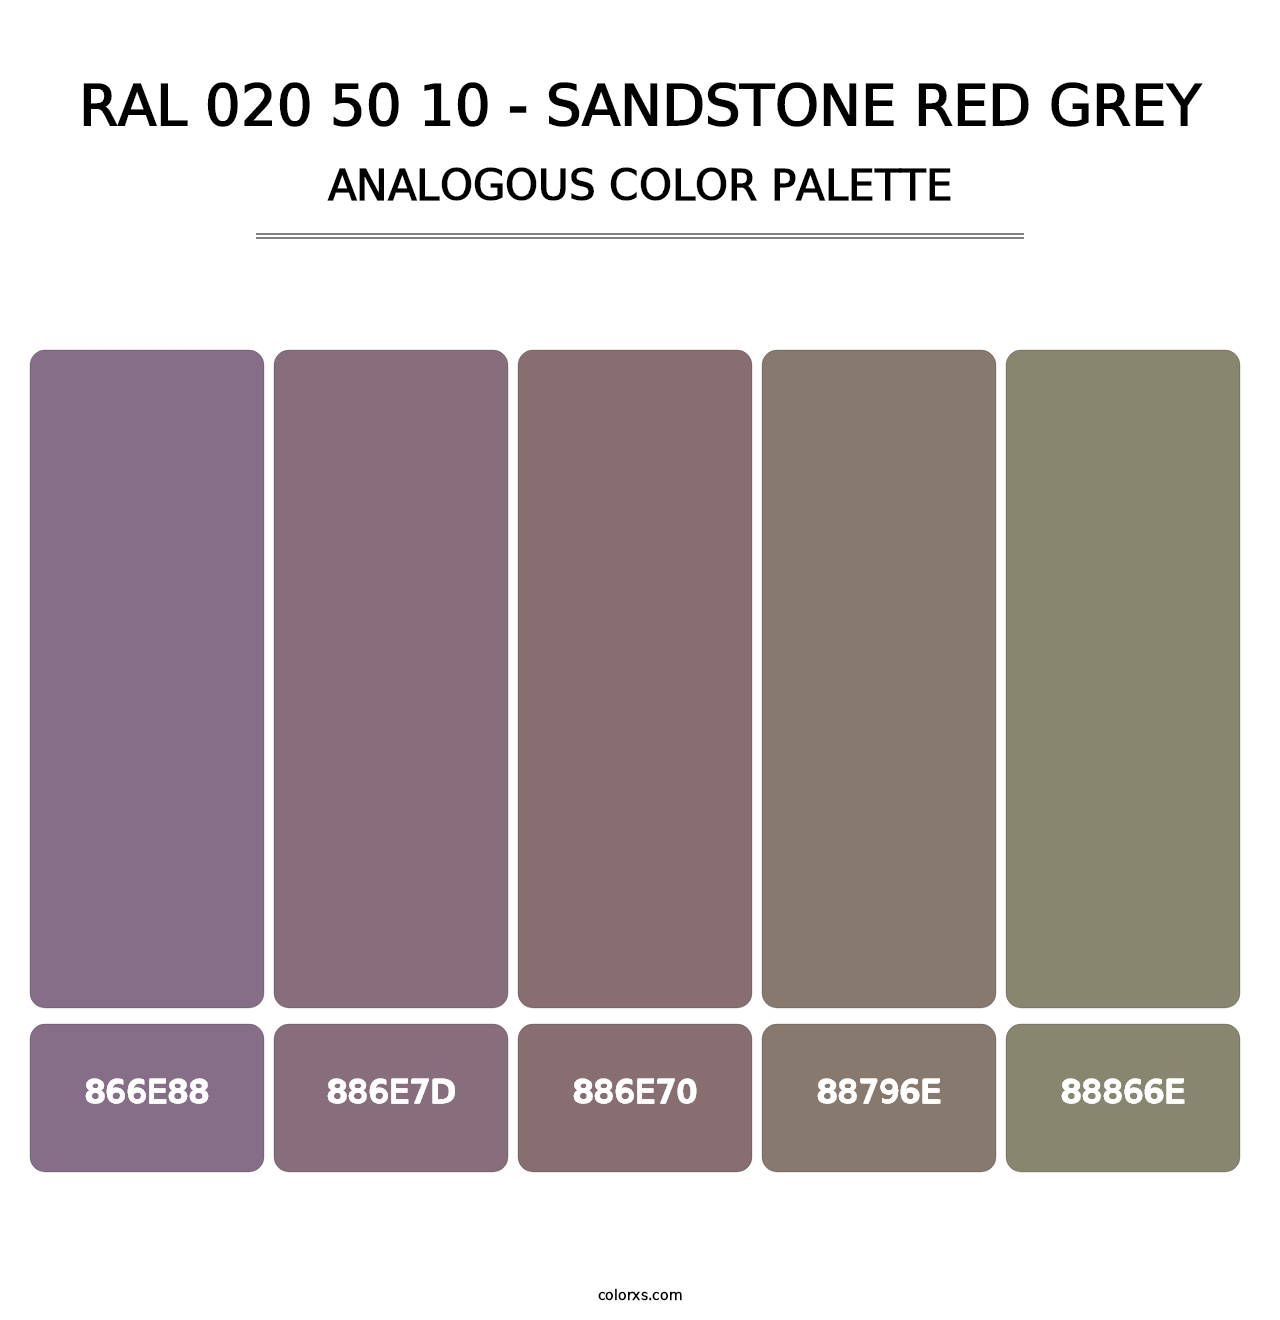 RAL 020 50 10 - Sandstone Red Grey - Analogous Color Palette